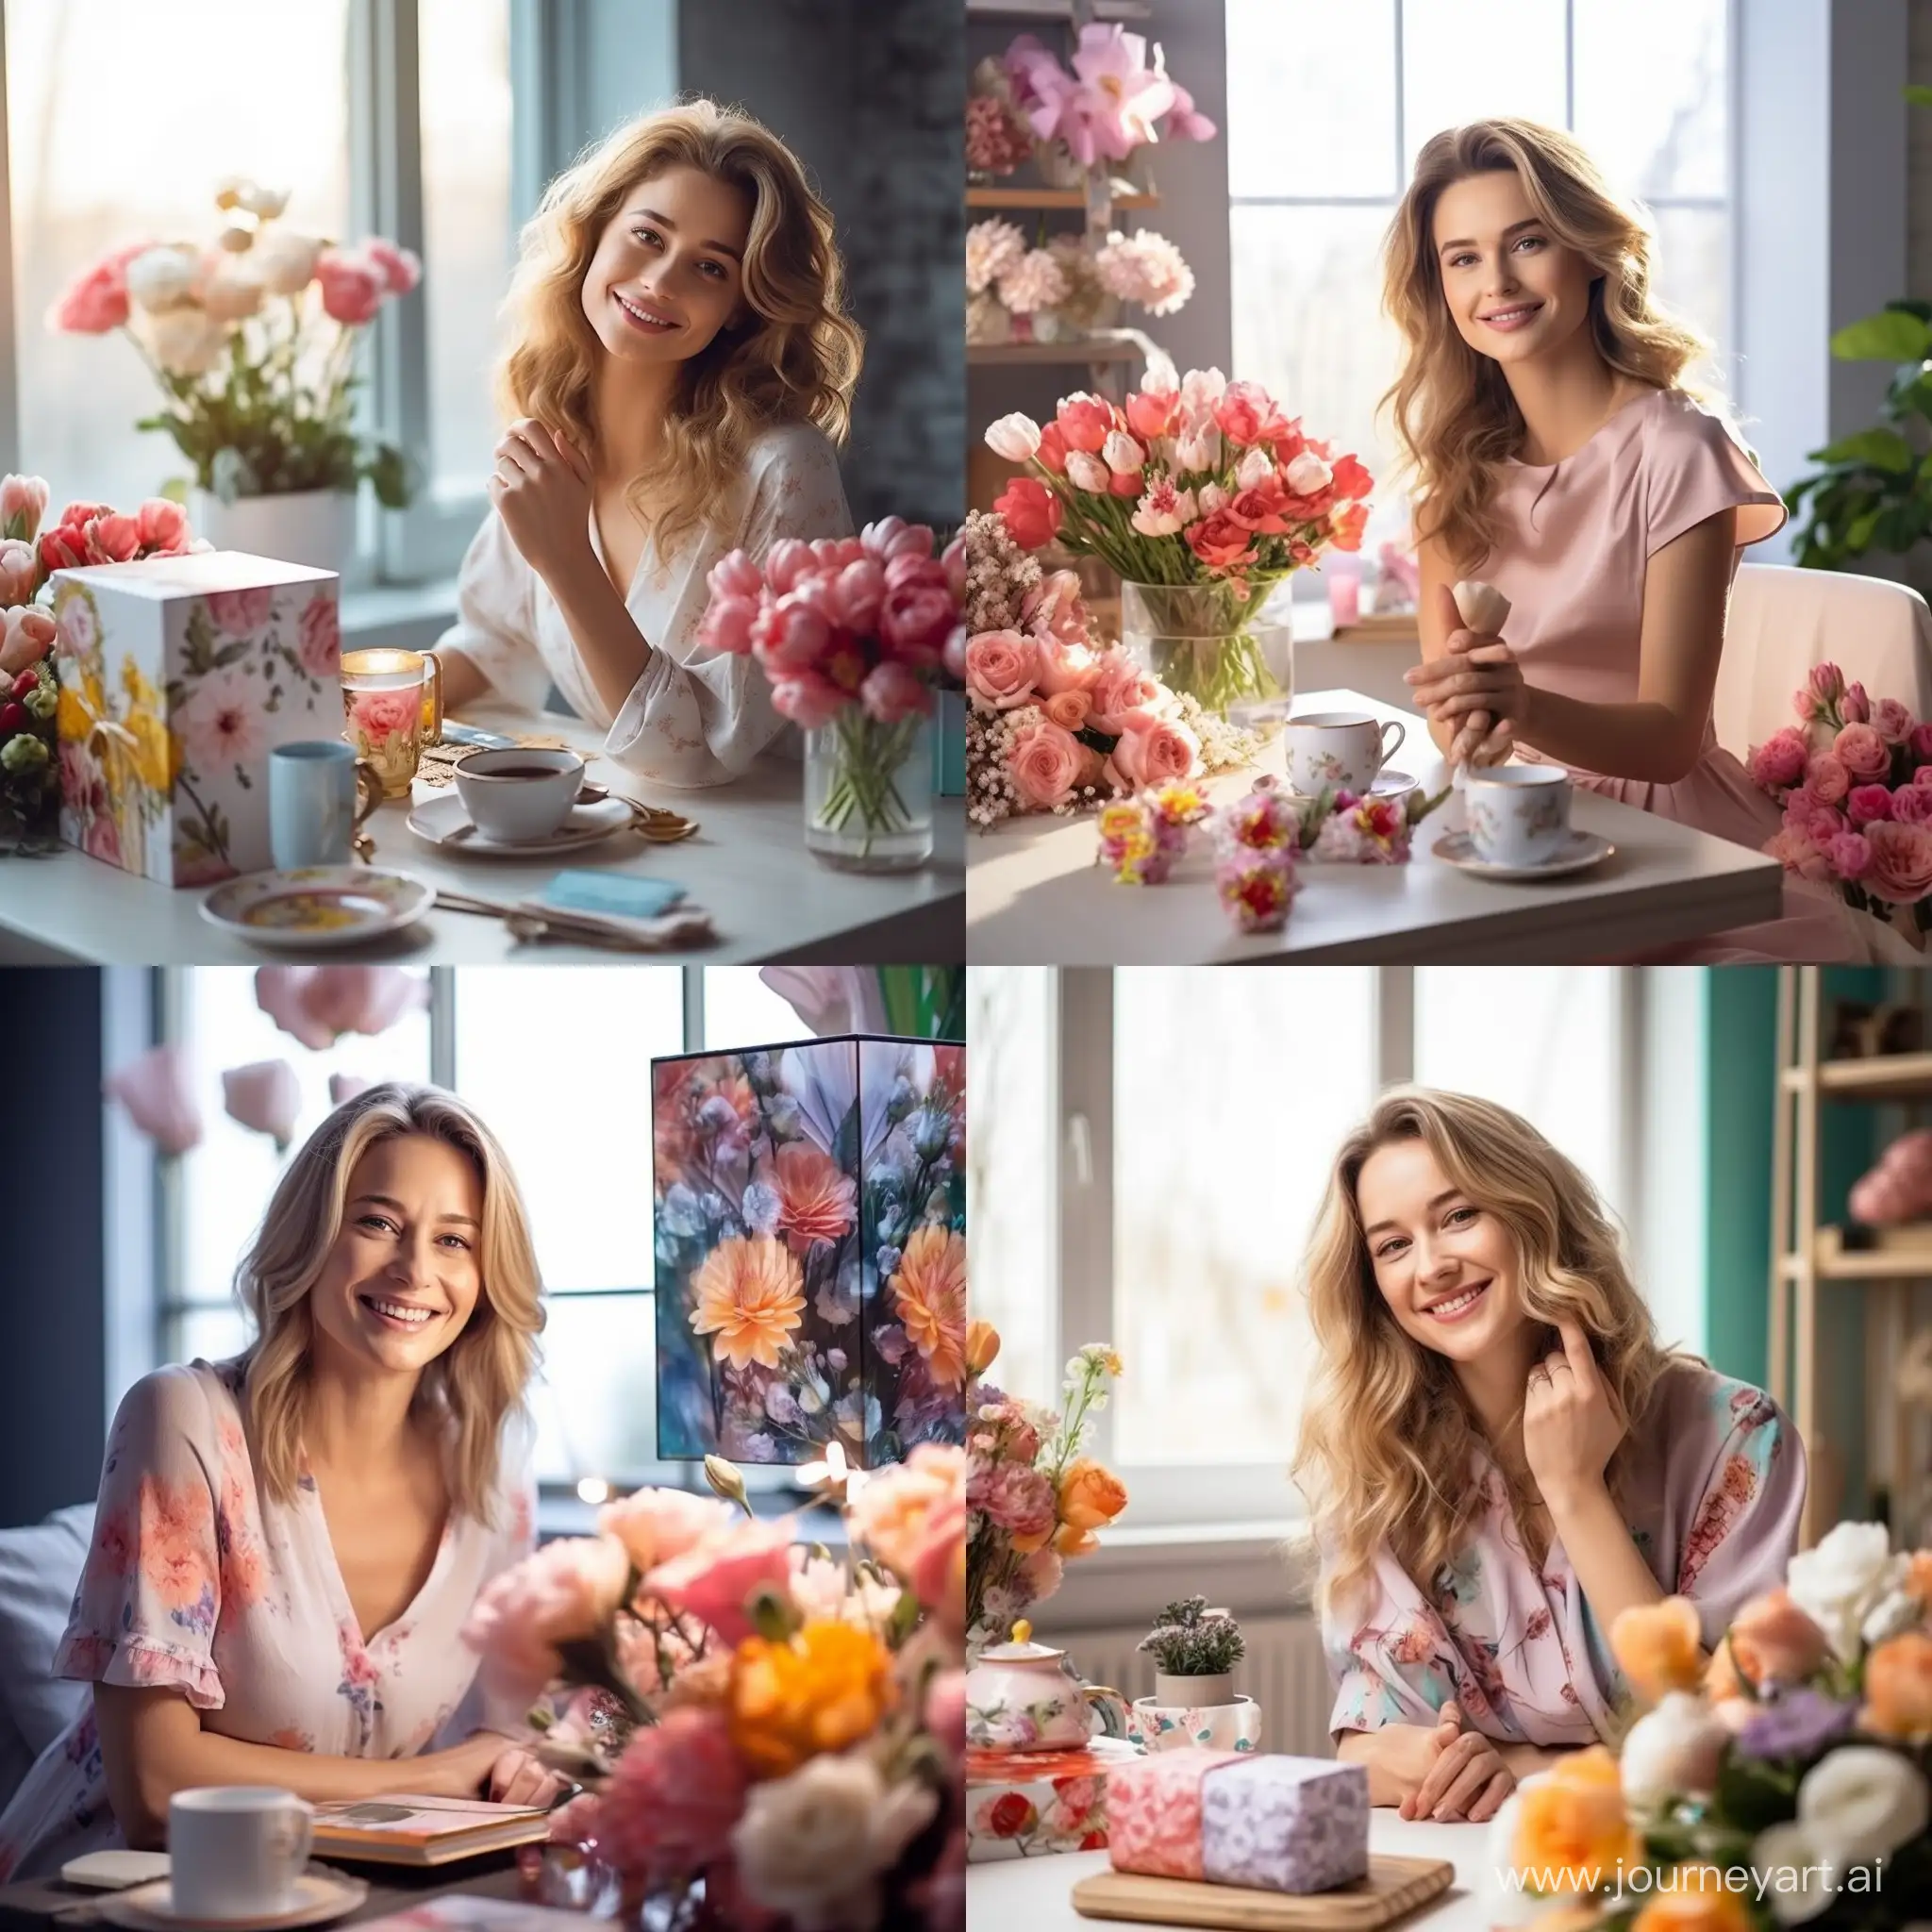 Joyful-Woman-with-Easter-Gift-in-a-LightFilled-Spring-Setting